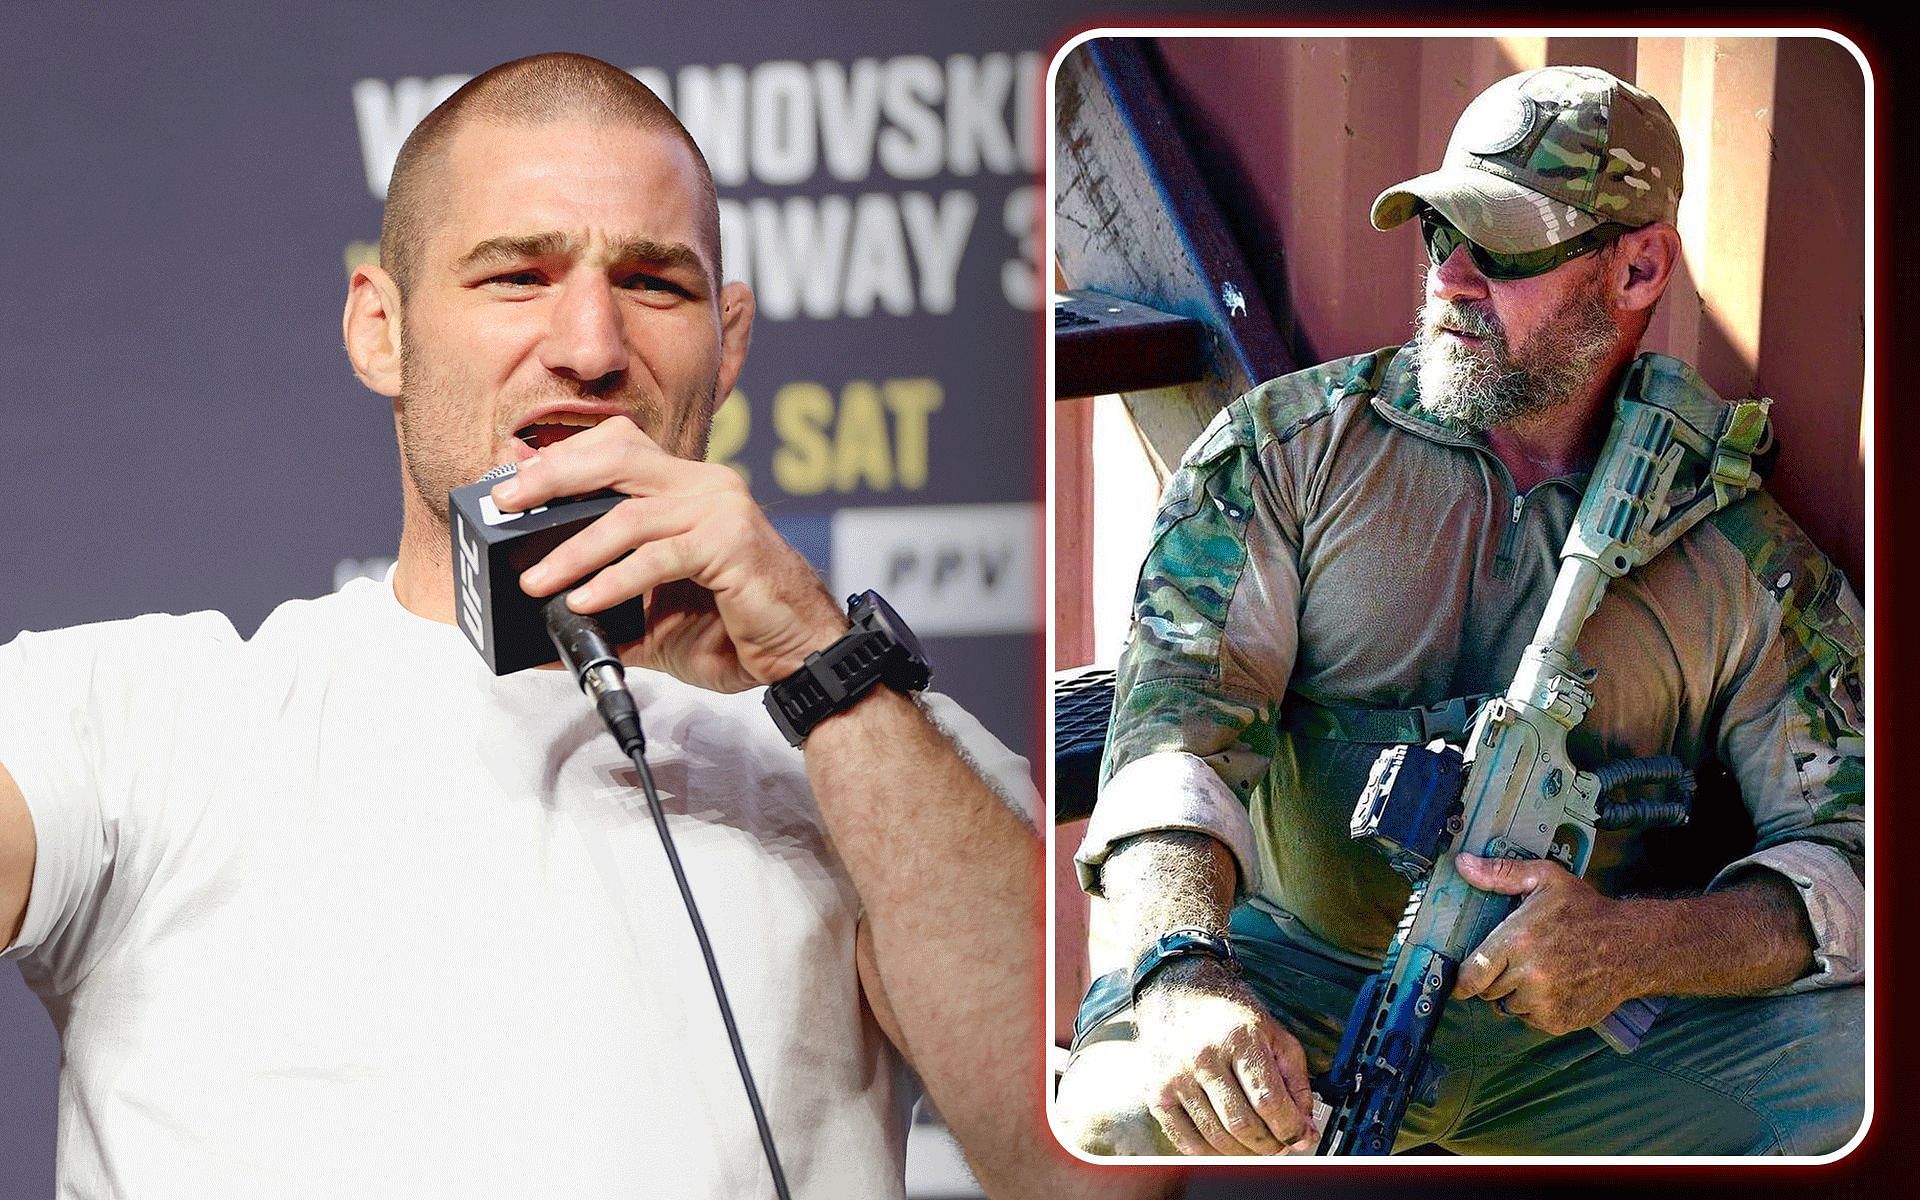 Sean Strickland challenges former Navy SEAL Jason Pike for street fight